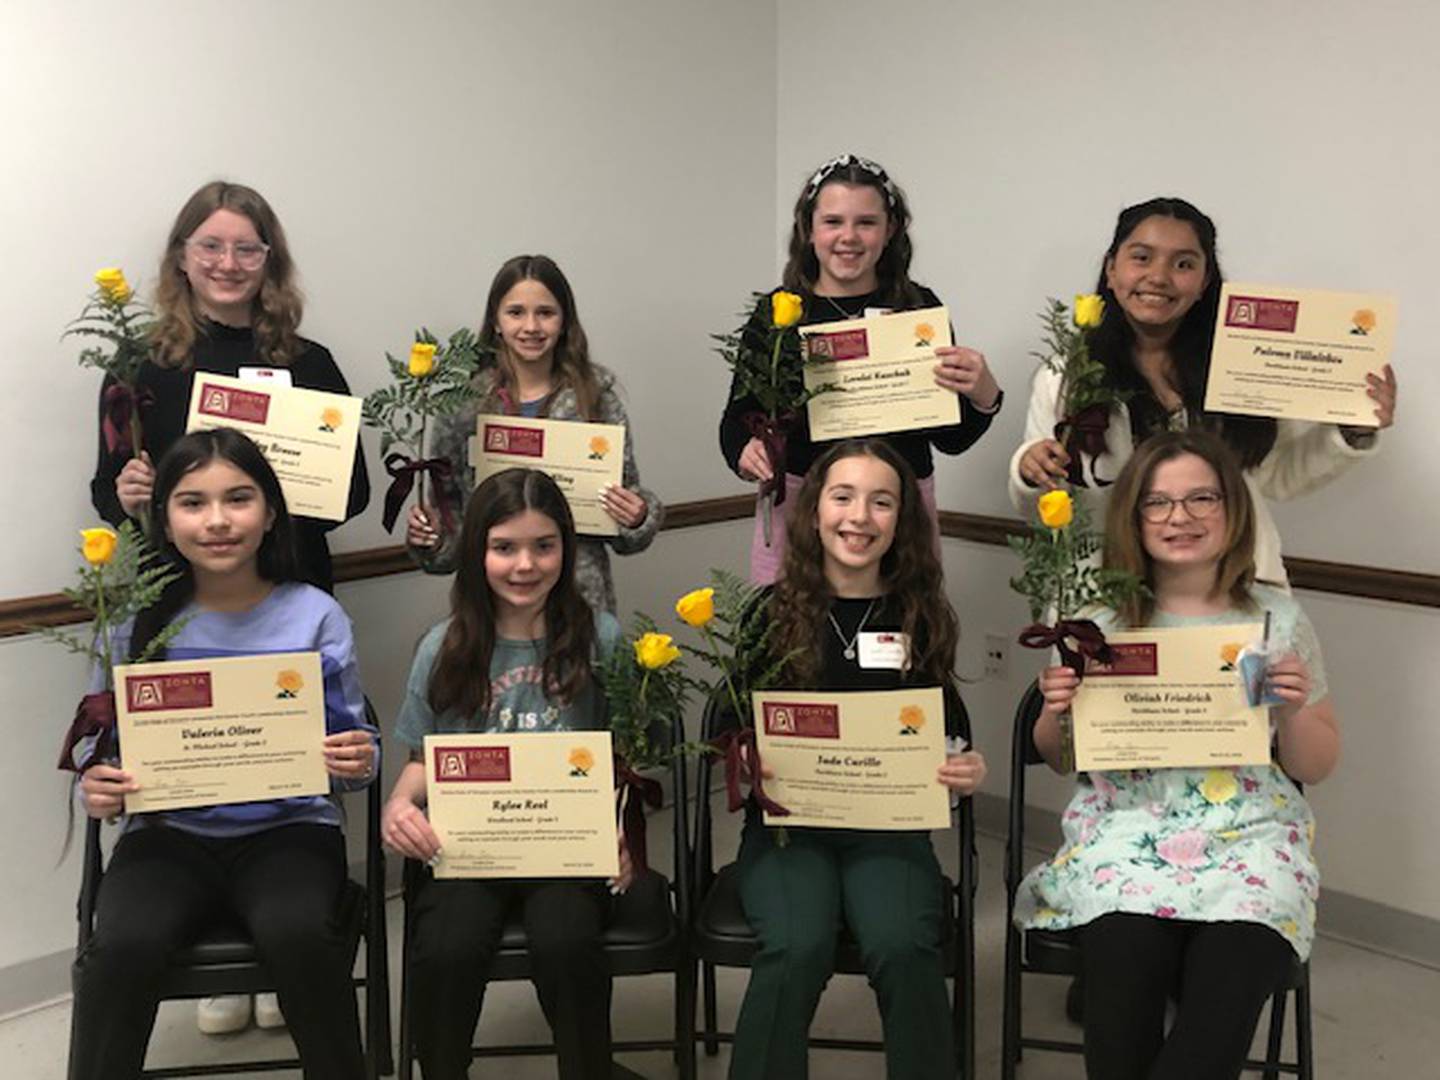 Fifth grade girls honored included (front, from left) Valeria Oliver, St. Michael School; Rylee Reel, Woodland School; Jade Carillo and Olivia Friedrich, both of Northlawn School. (Second row, from left) Harley Breese, Woodland School; Kabrie Kling, Ransom School; Lorelei Kaschak, Northlawn School and Paloma Villalobos. Not pictured: Alex Pedelty and Melisa Chavez, Northlawn School.